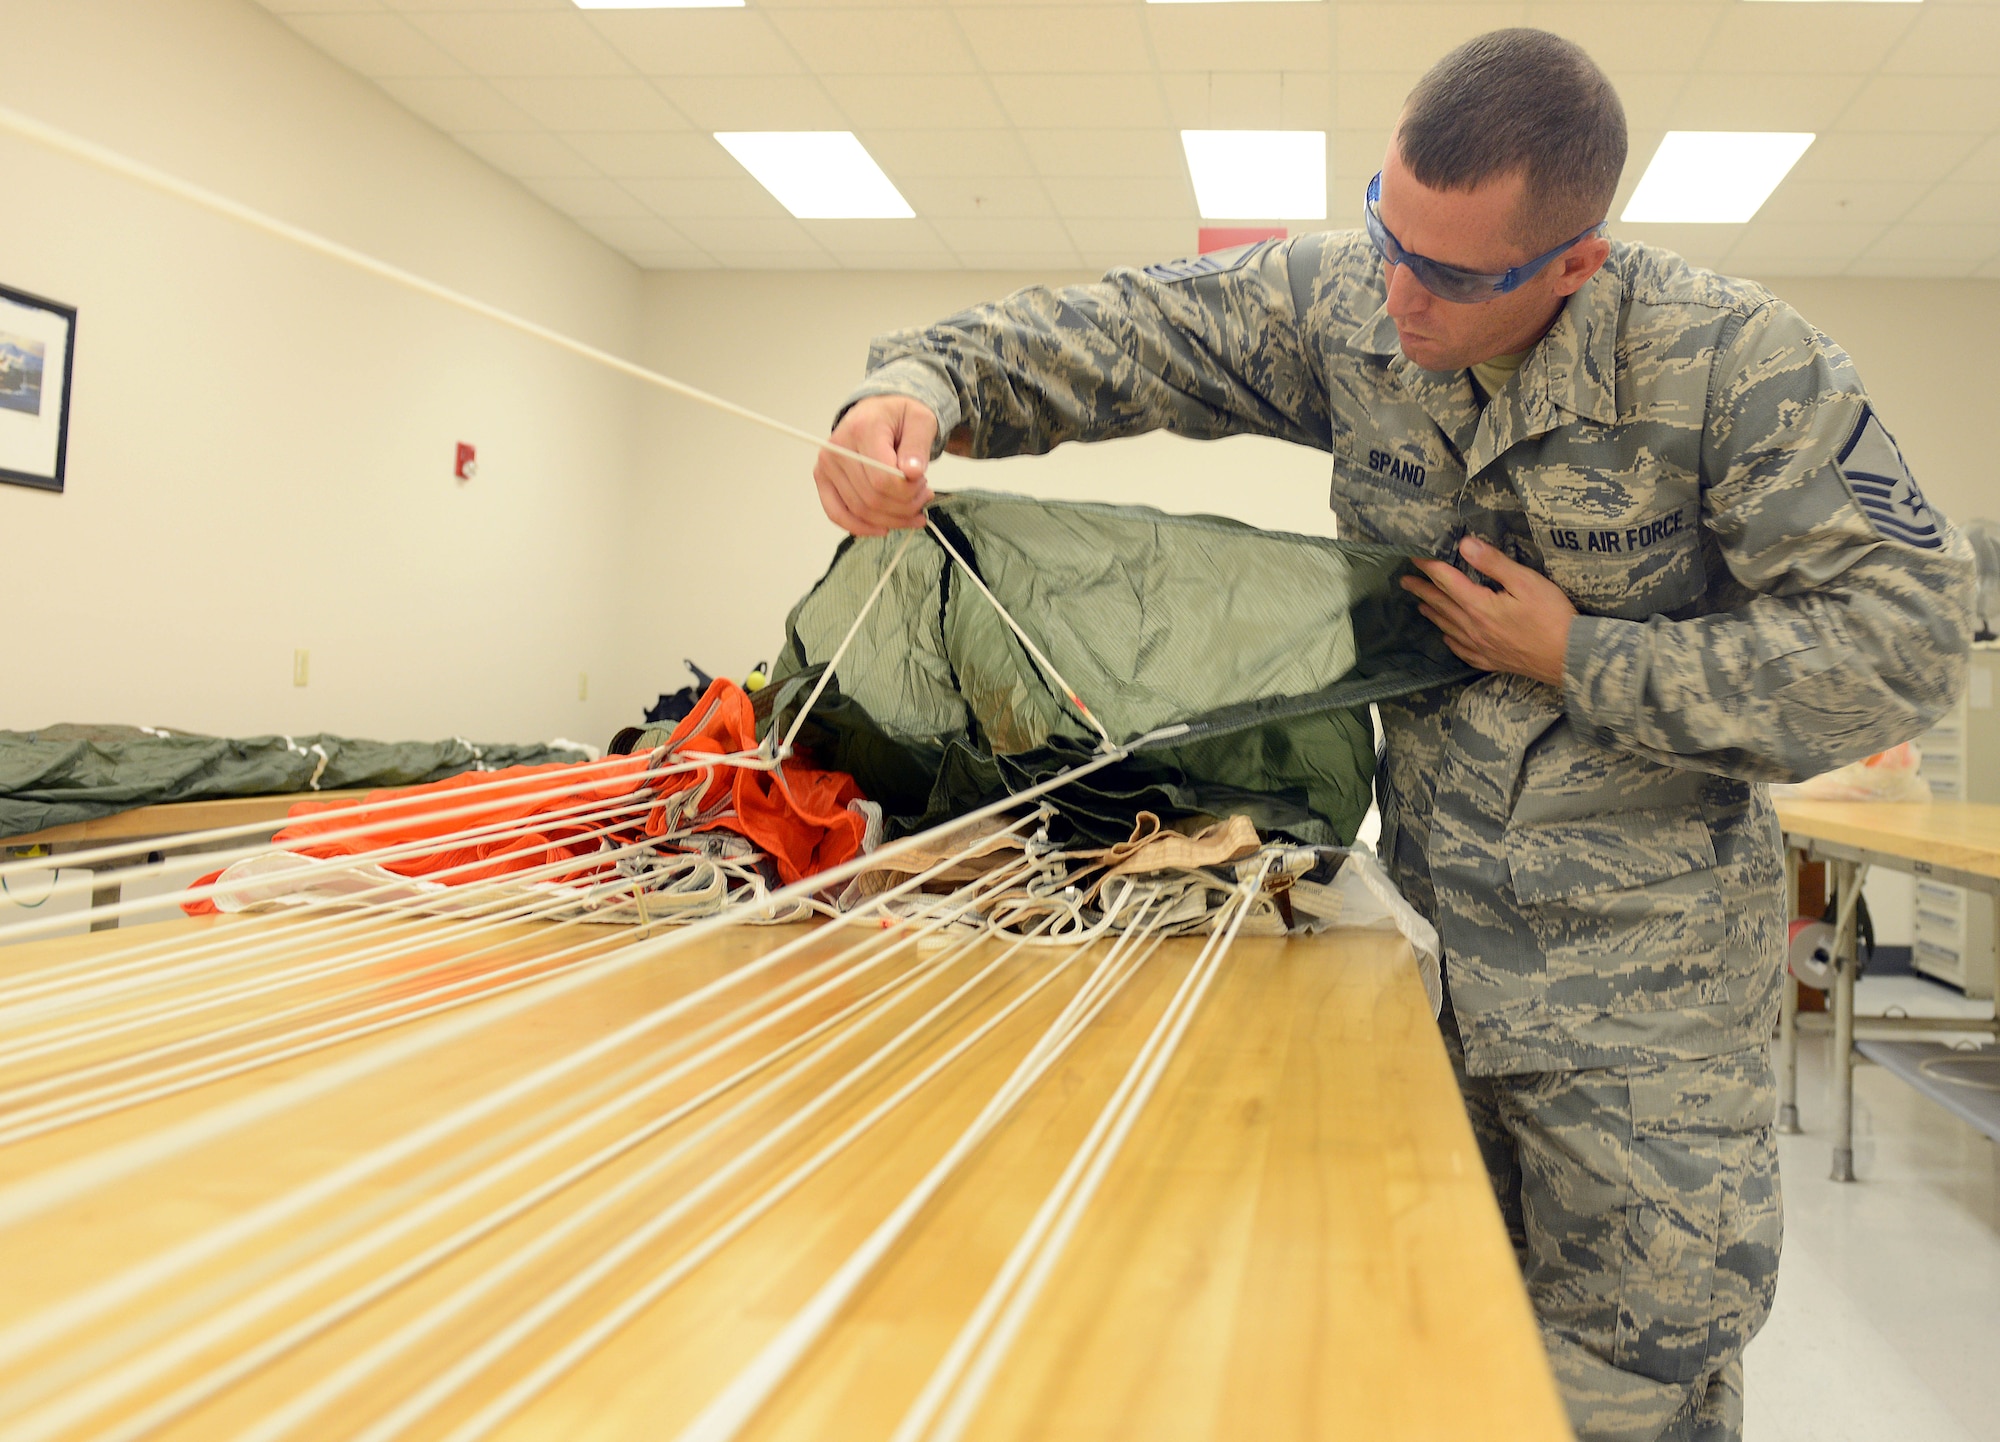 Master Sgt. Kevin Spano, 339th Flight Test Squadron aircrew flight equipment, inspects an Advanced Concept Ejection Seat canopy. Activation of an aircraft ejection seat by a crewmember sets off a chain of events that propels the canopy away from the plane and thrusts the crewmember safely away from the aircraft. (U.S. Air Force photo by Tommie Horton)